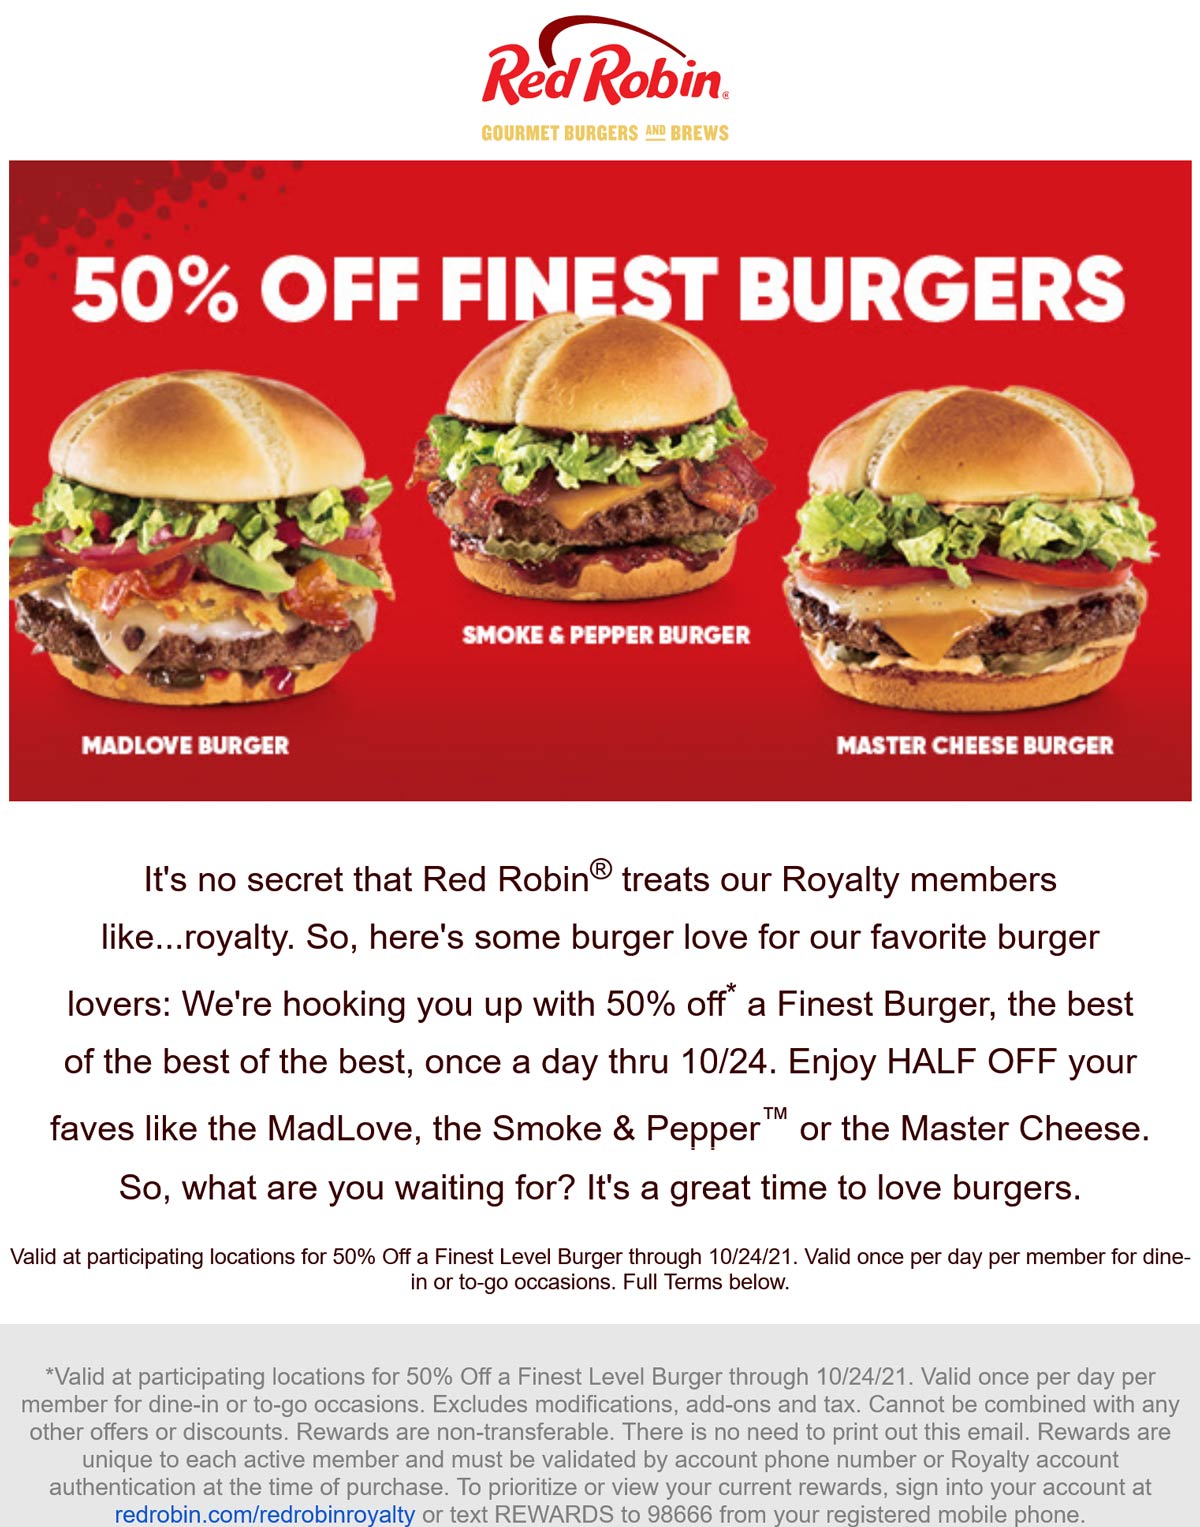 Red Robin restaurants Coupon  50% off cheeseburgers at Red Robin restaurants for royalty #redrobin 